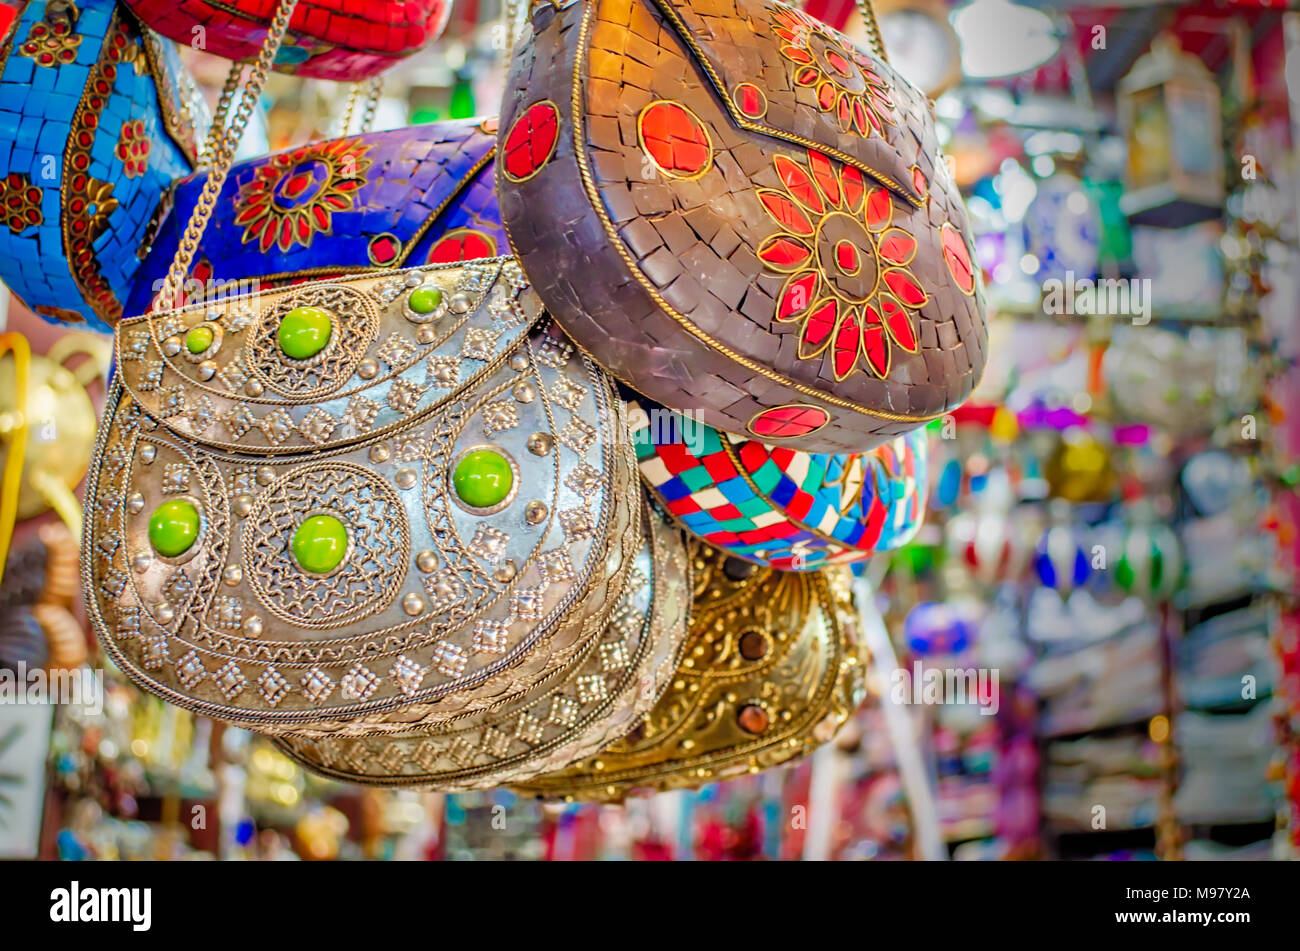 Arabic style ladies' bags on display in the shop - Muscat, Oman Stock Photo  - Alamy